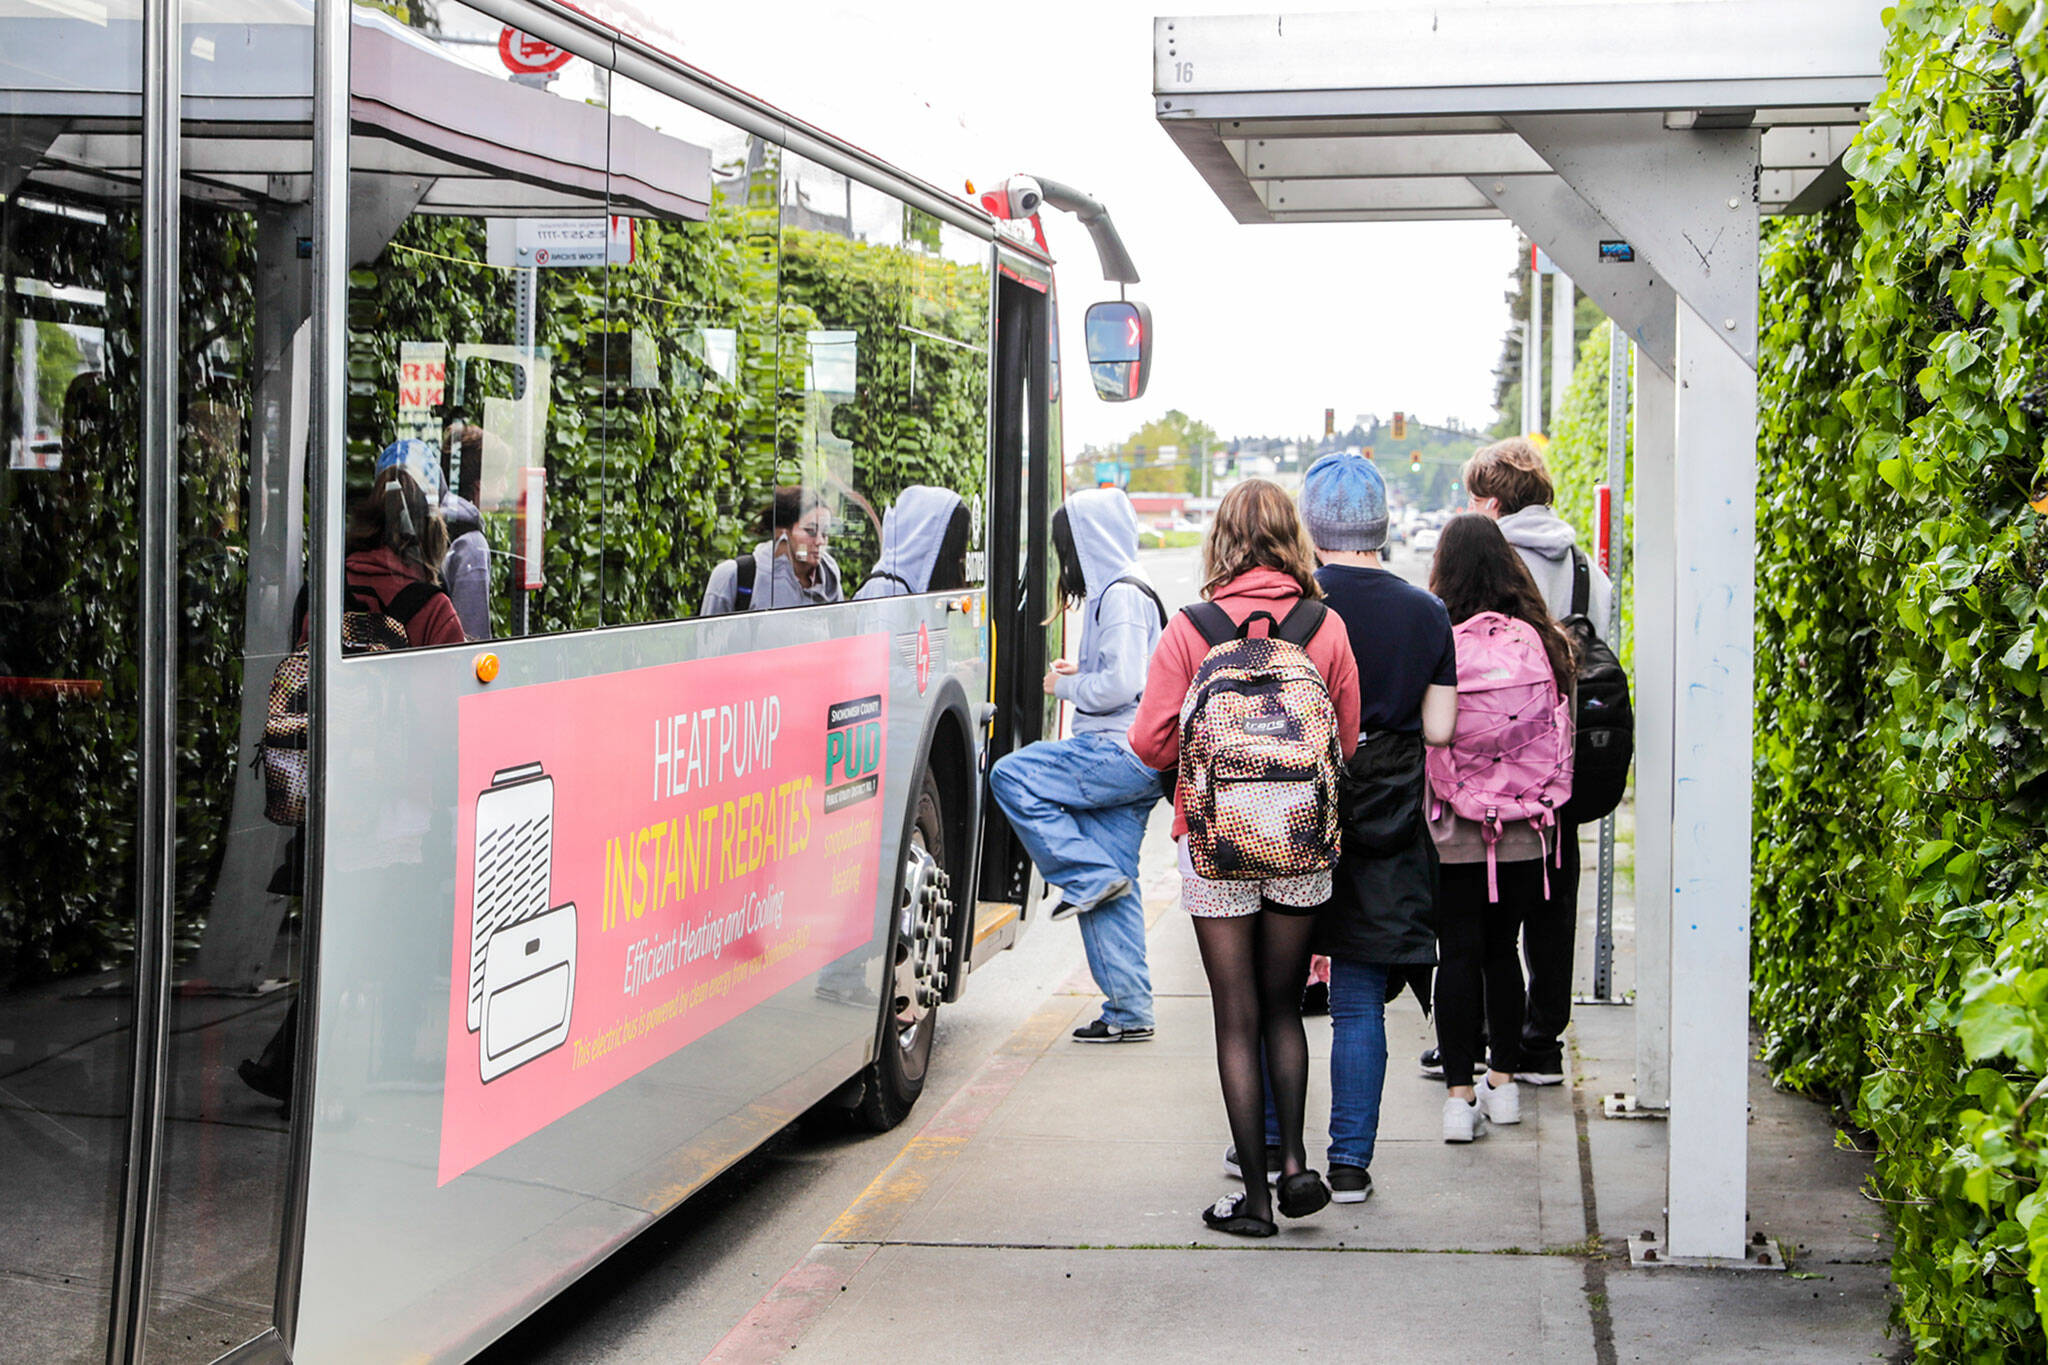 Students board a bus Wednesday near Sequoia High School in Everett. The city’s transit agency is proposing to let riders 18 and under ride without paying a fare, a provision of Move Ahead Washington legislation. (Kevin Clark / The Herald)